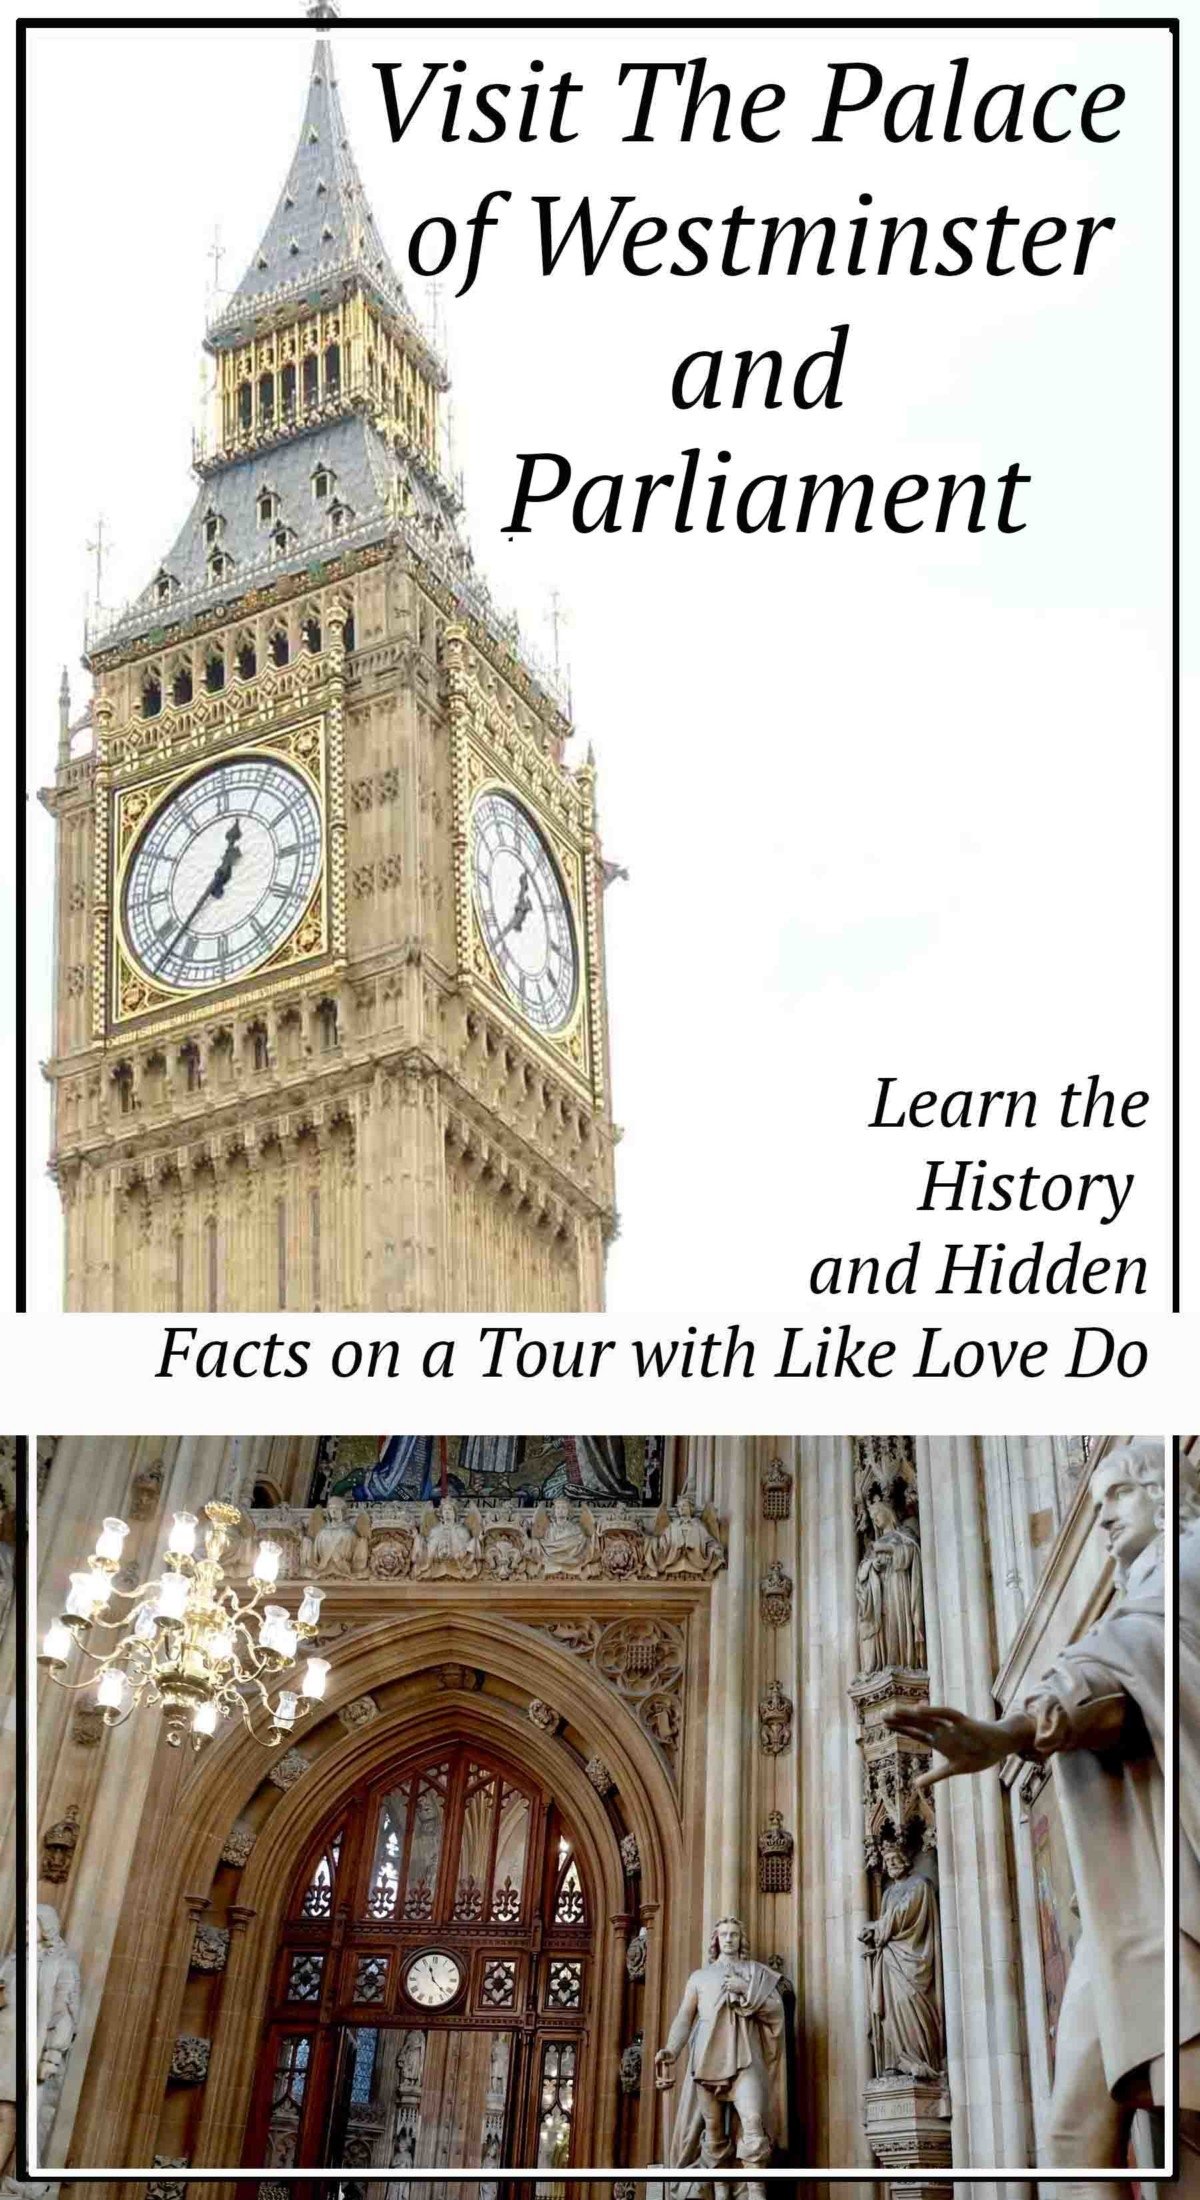 The Palace of westminster and Parliament